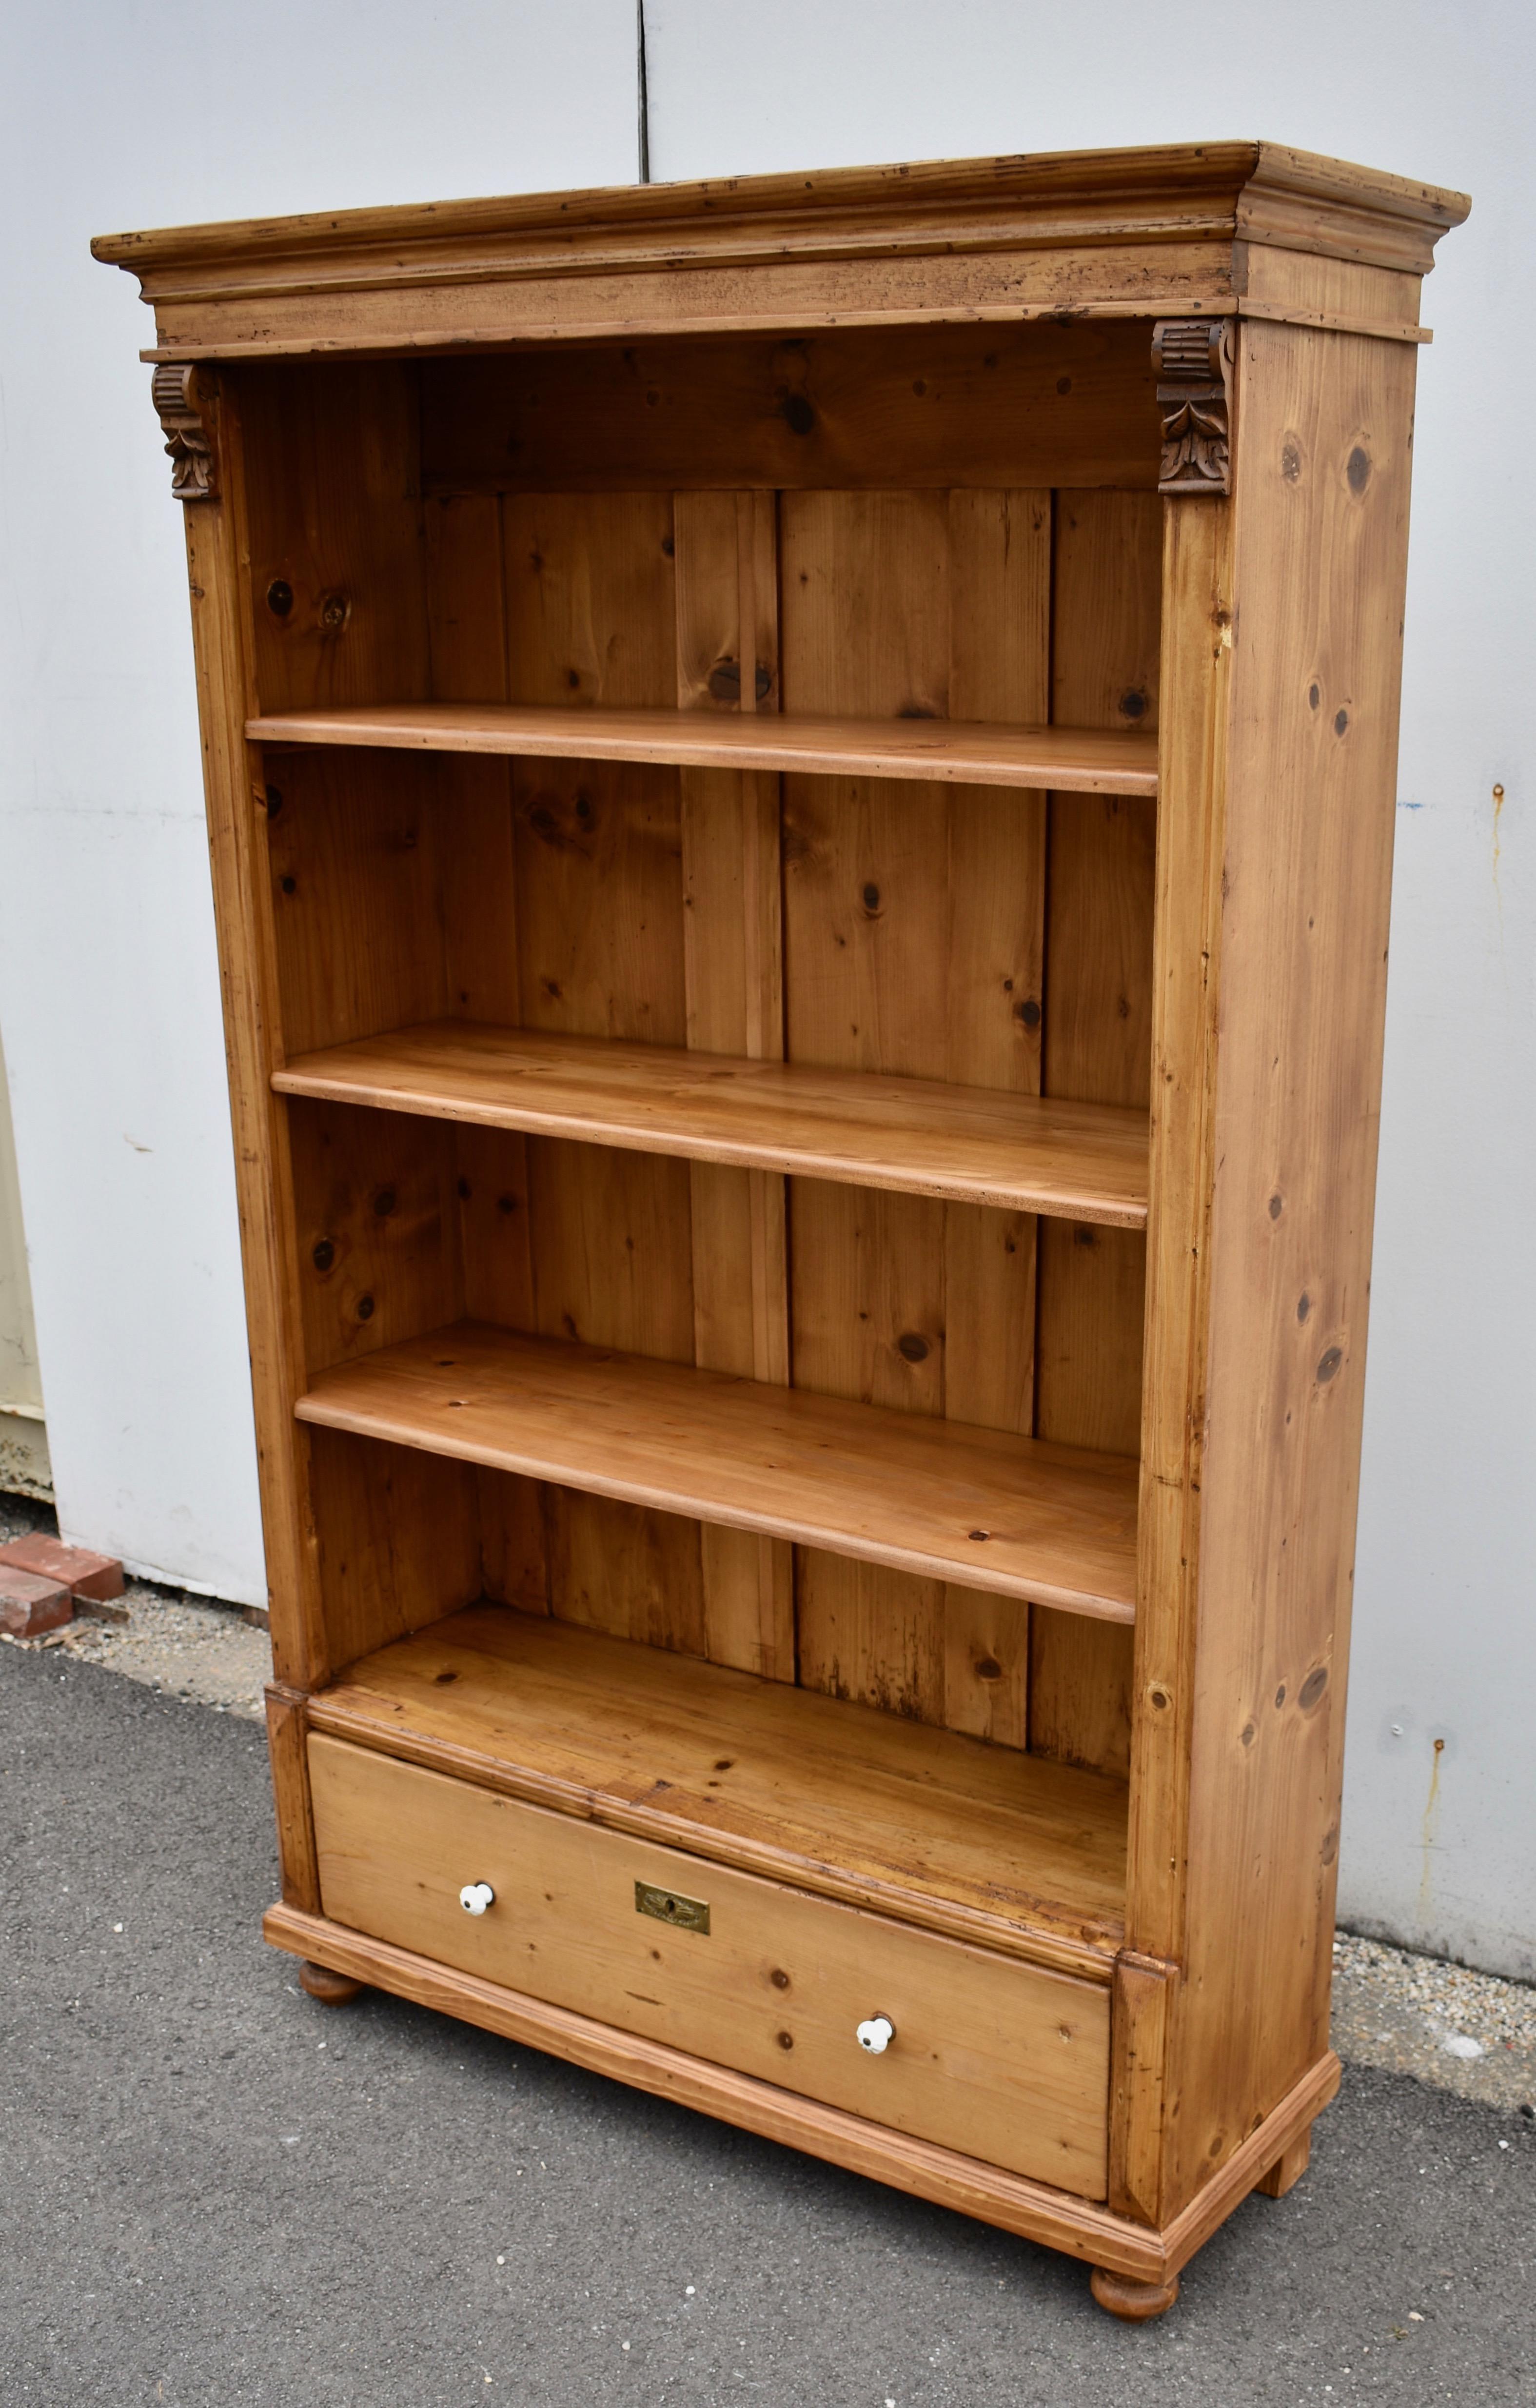 Dutch Vintage Pine Open Bookcase from Armoire circa 1930 For Sale